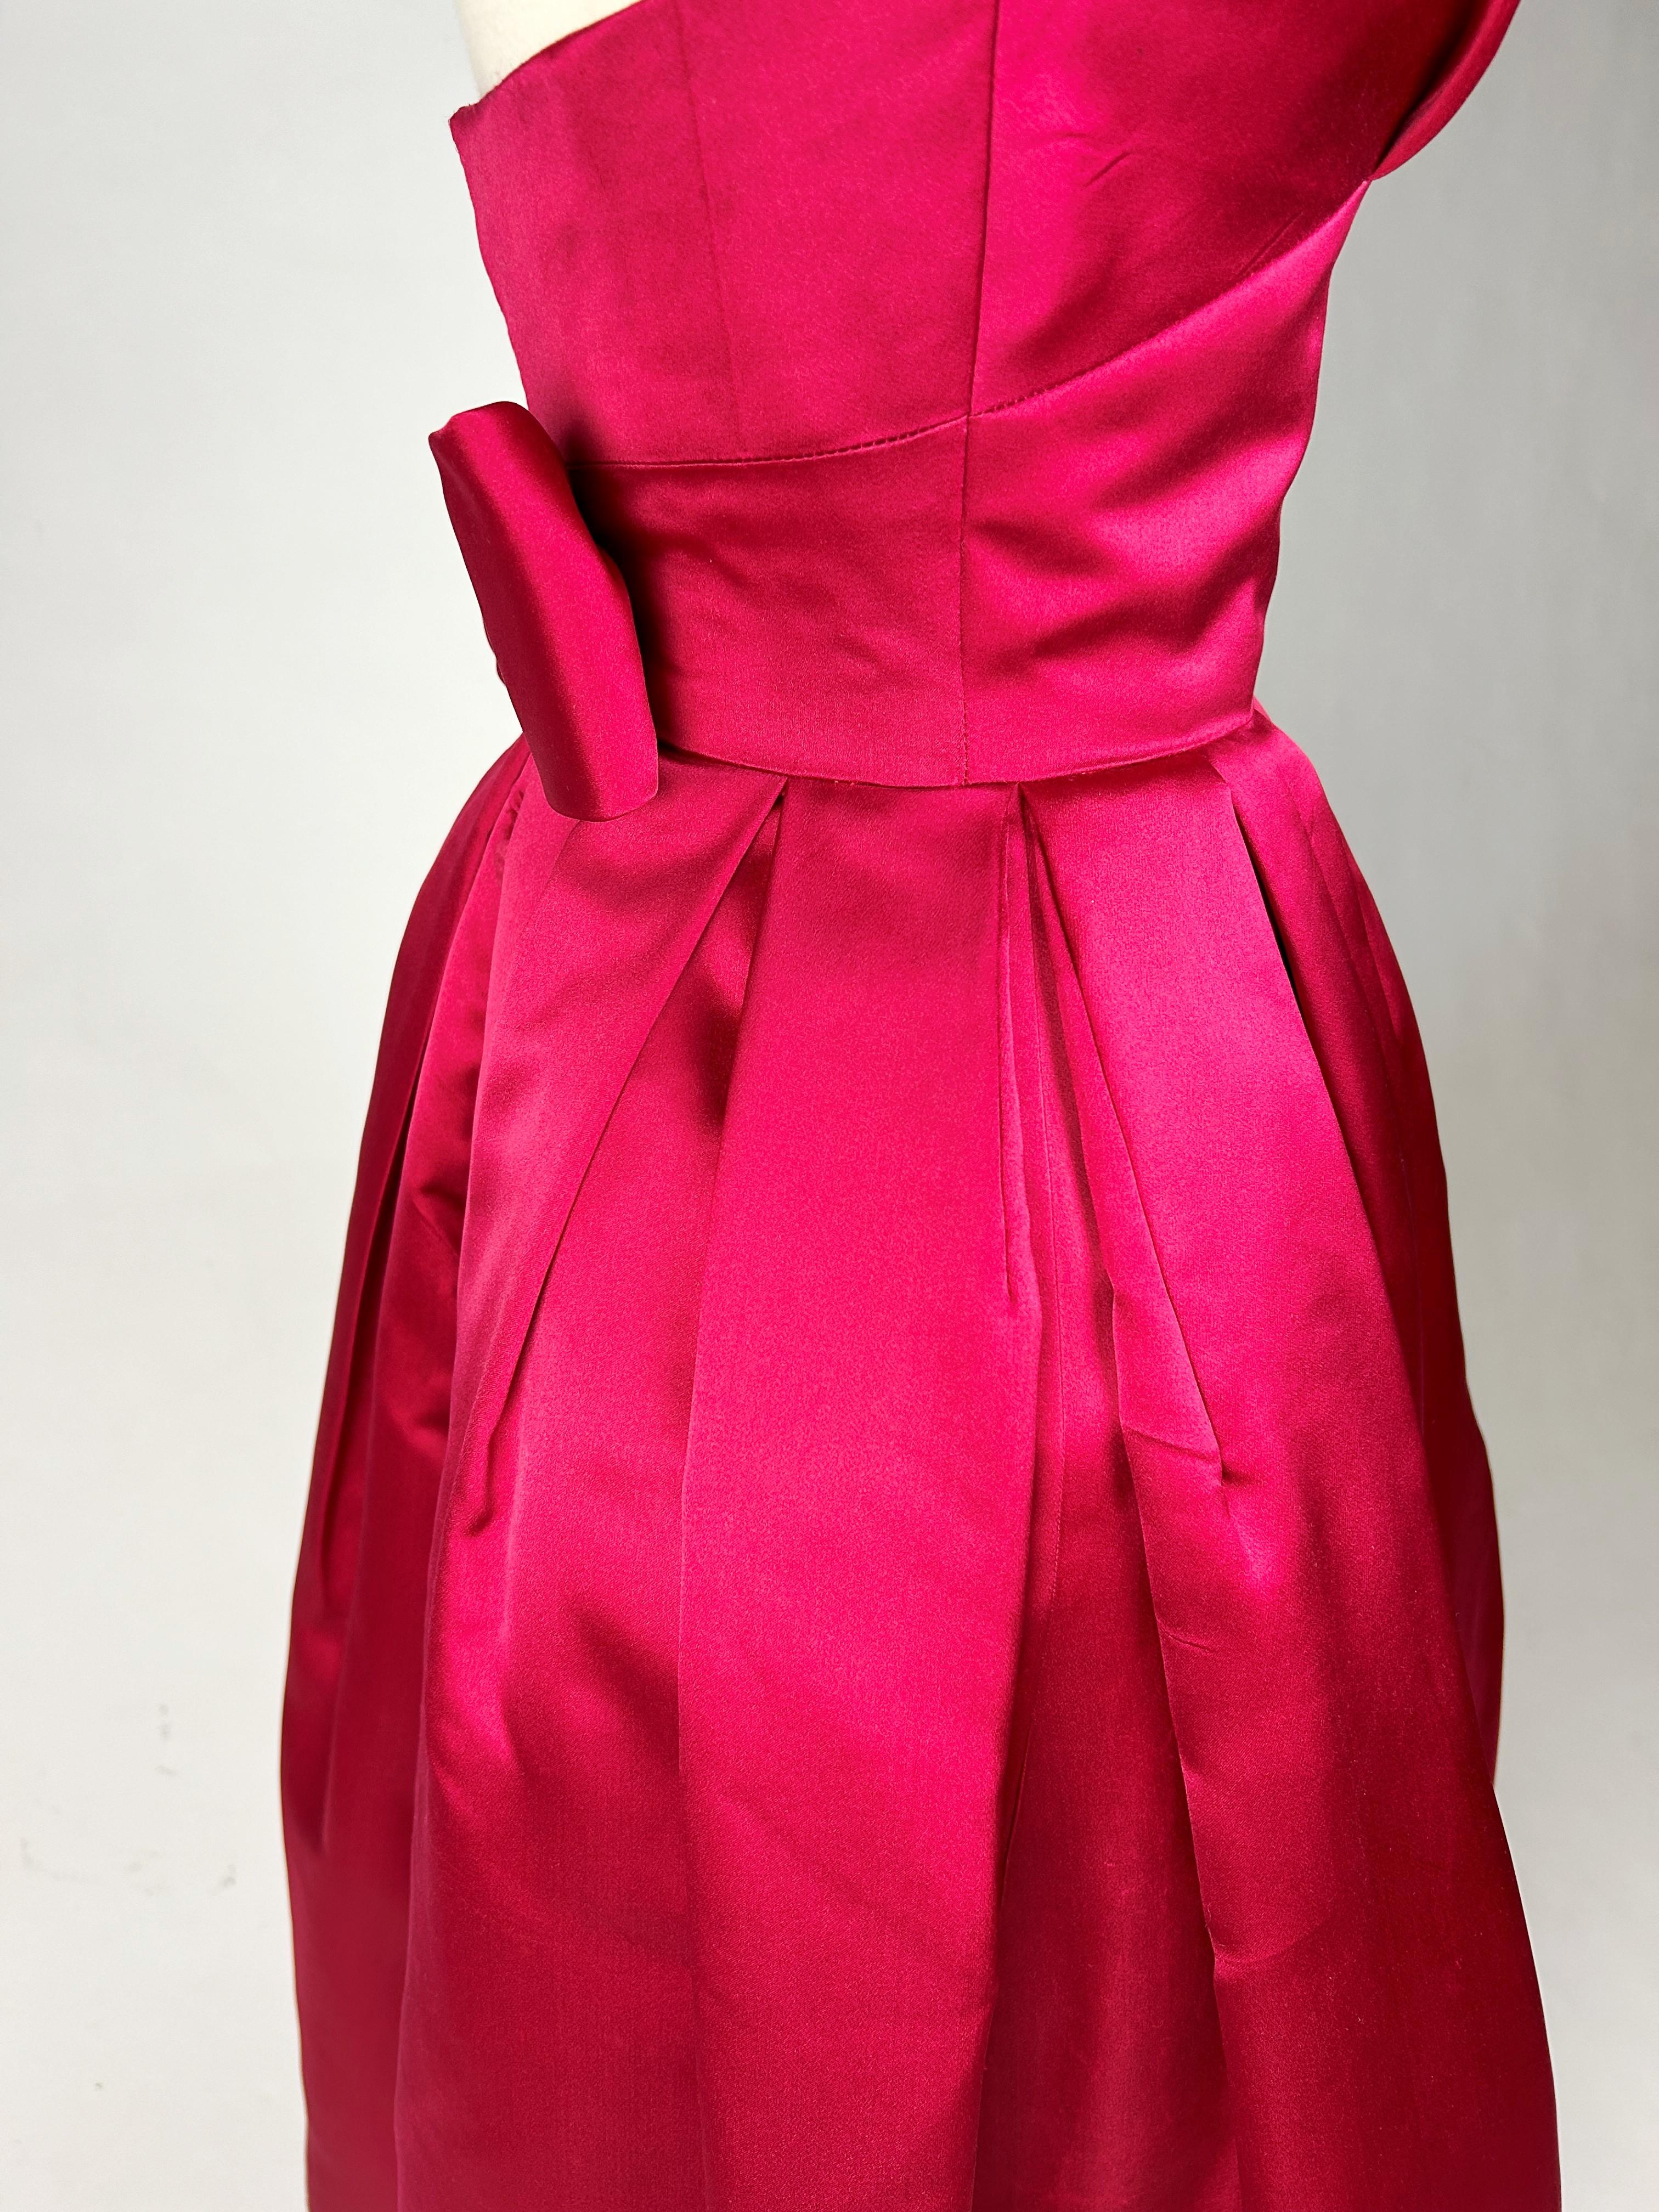 Cocktail dress in raspberry satin in the style of Christian Dior - Paris C. 1955 6